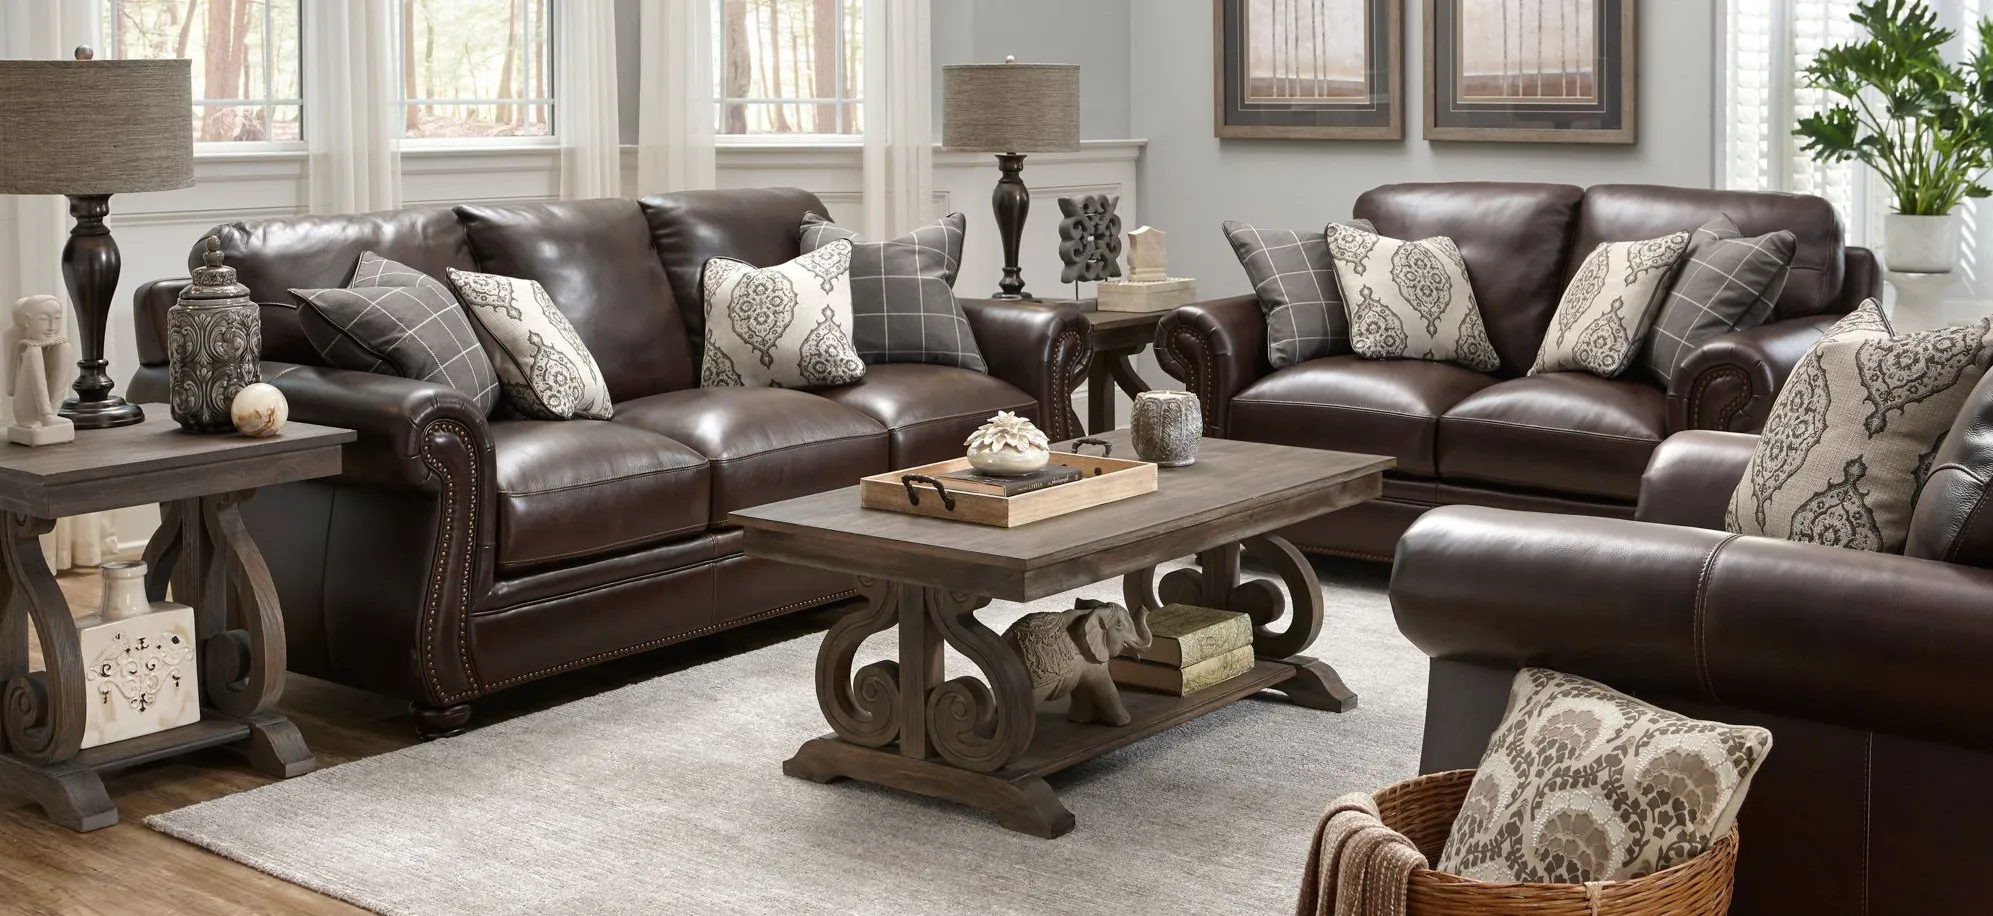 Alistair 2-pc. Leather Sofa and Loveseat Set in Brown by Bellanest